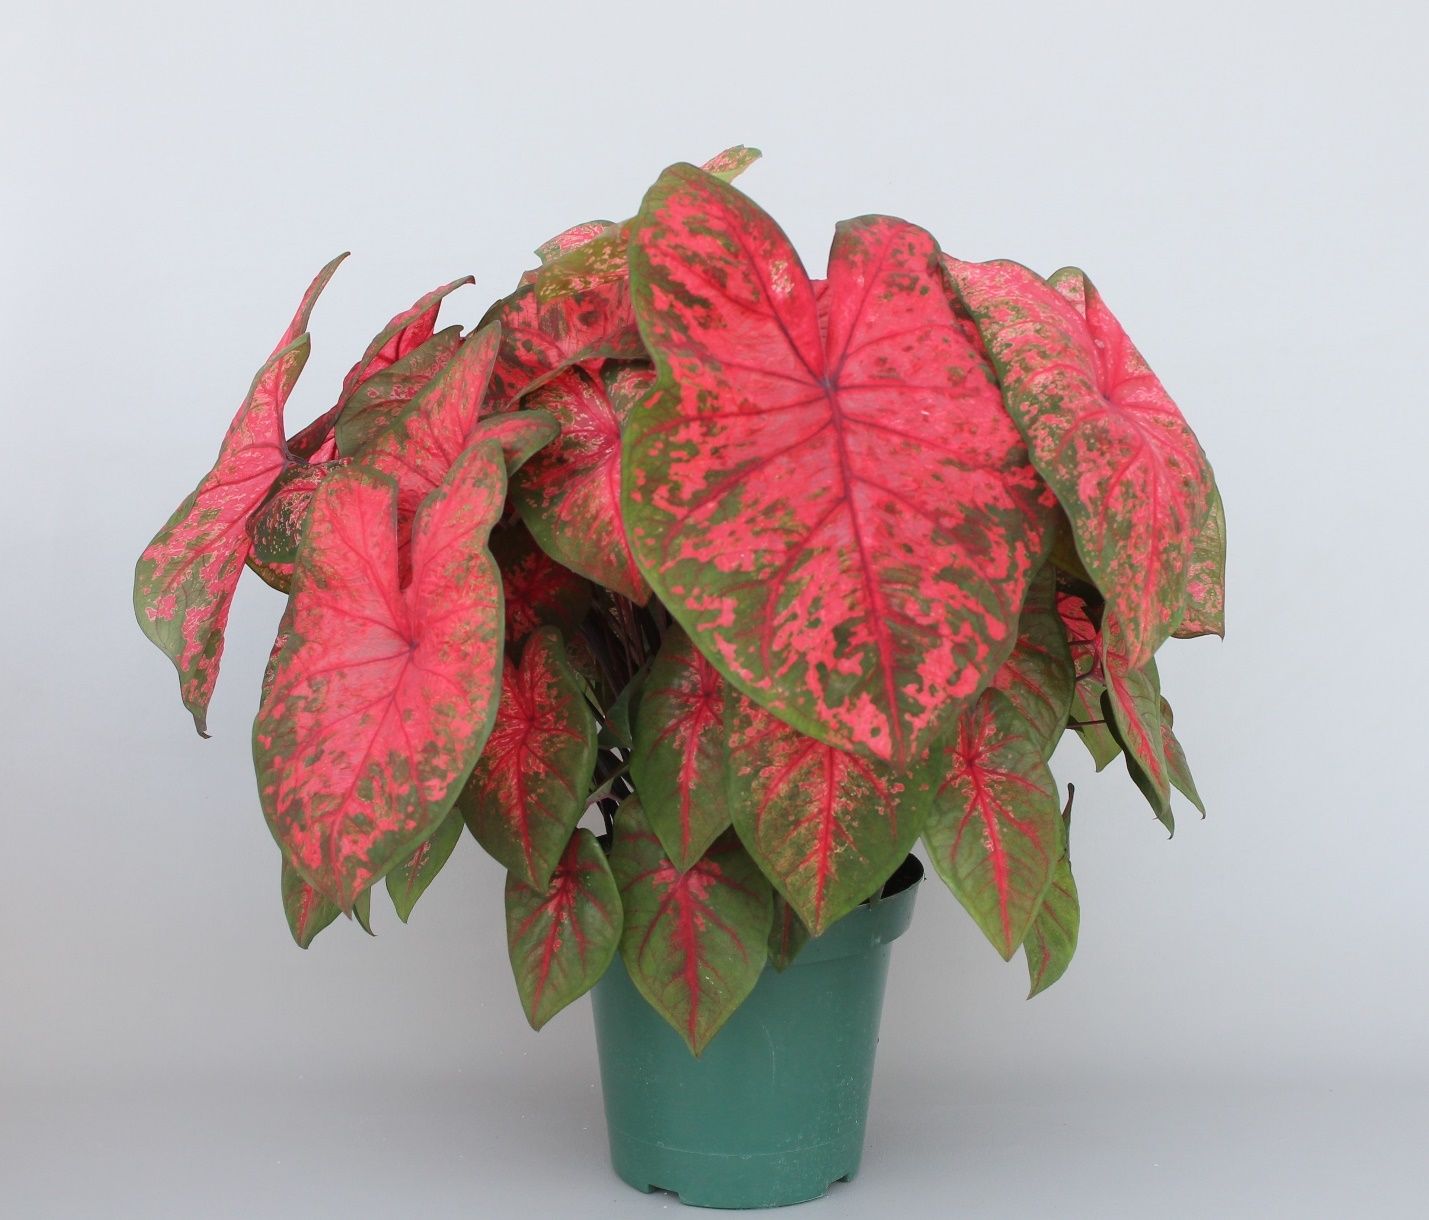 A typical plant of ‘Lava Glow’ (35-day-old) caladium forced from four No. 1 (1.5 to 2.5 inches diameter) tubers in an 8-inch container. Tubers were planted on 14 May 2020, and the plant was grown in a greenhouse with approximately 30% light exclusion. The photo was taken on 19 June 2020. 